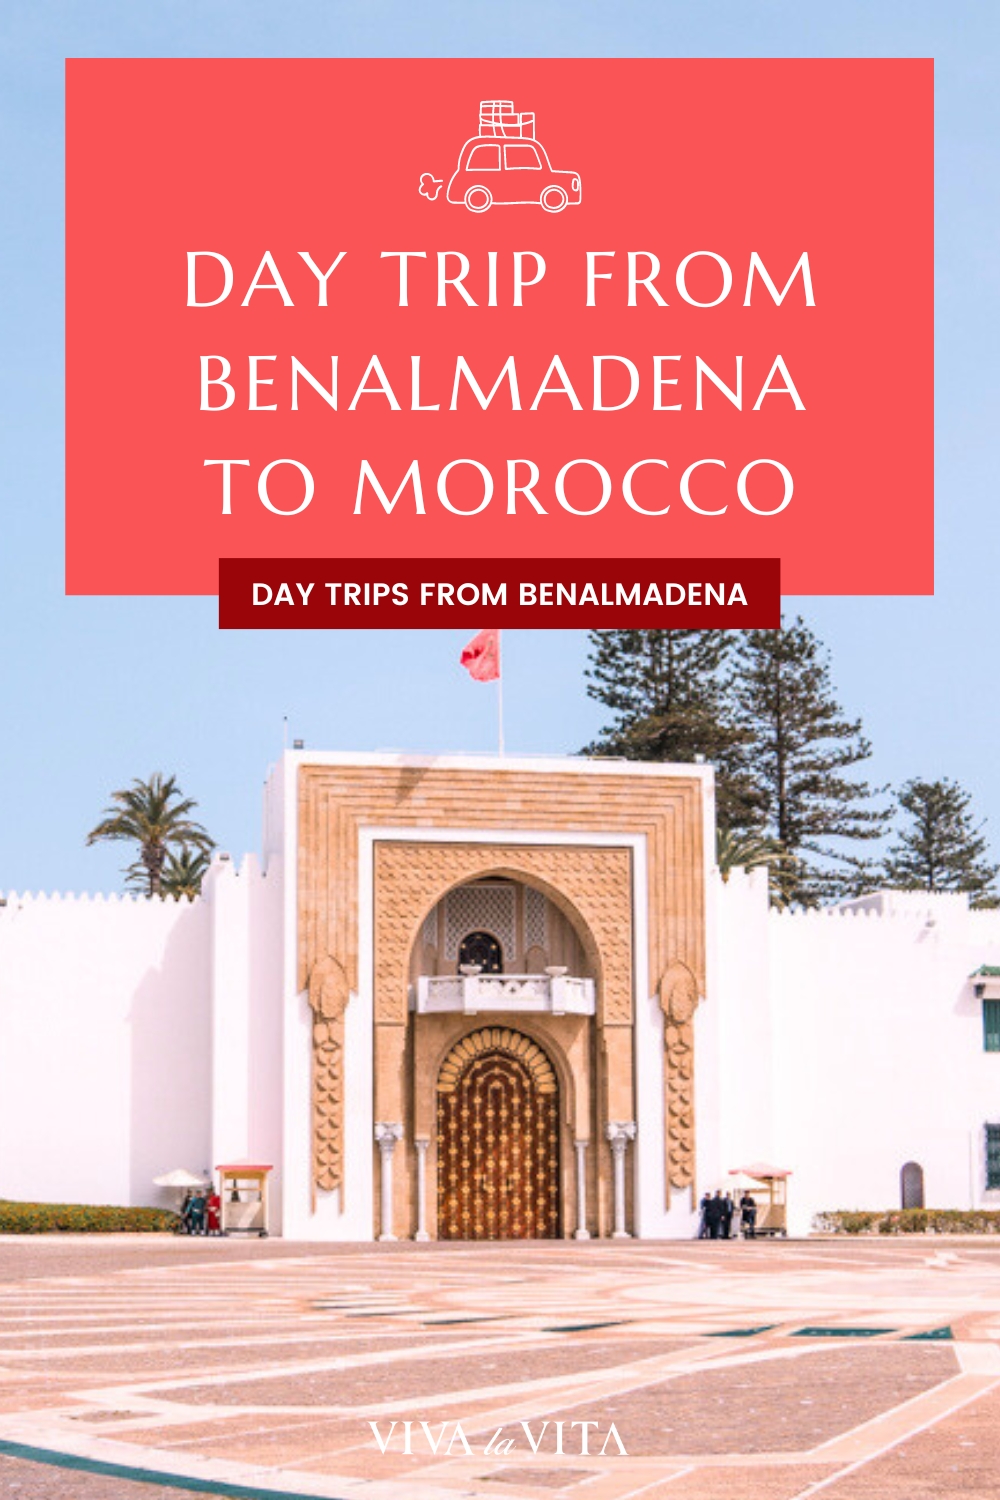 pinterest image showing the Royal Palace in Tetouan, Morocco with a headline - day trip from benalmadena to morocco, day trips from Benalmadena